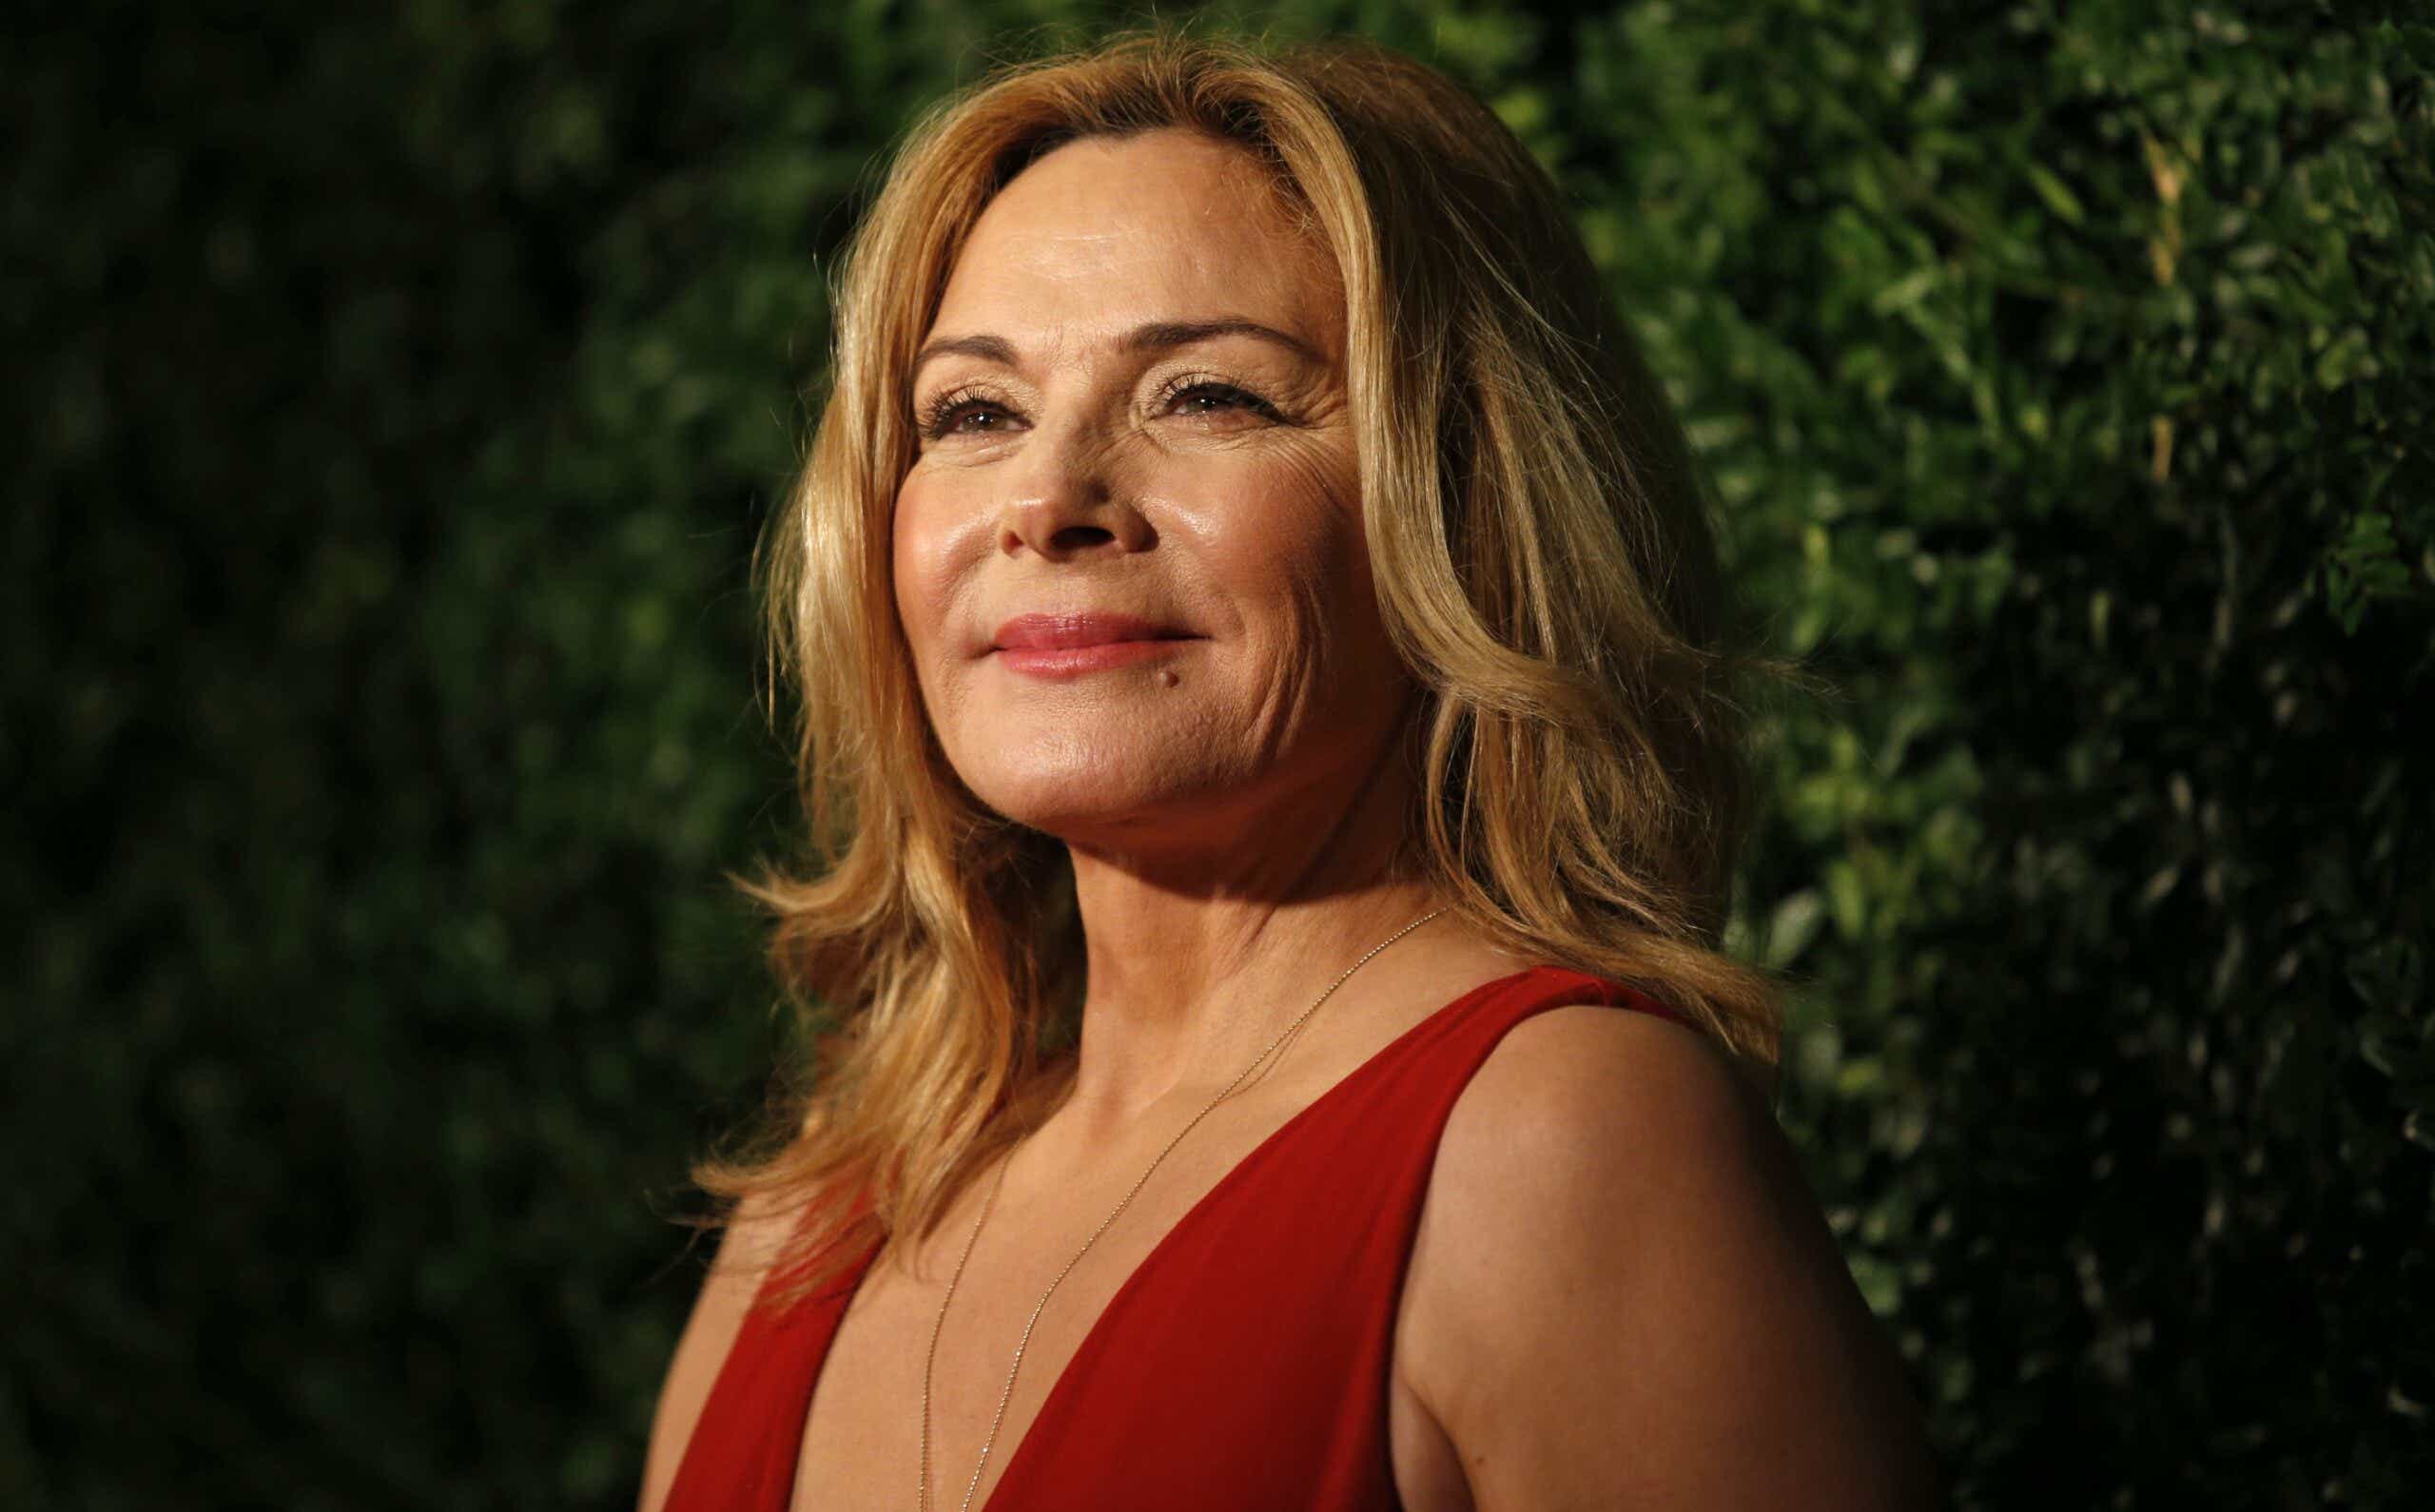 Kim Cattrall famously once said, 'I don't want to be in a